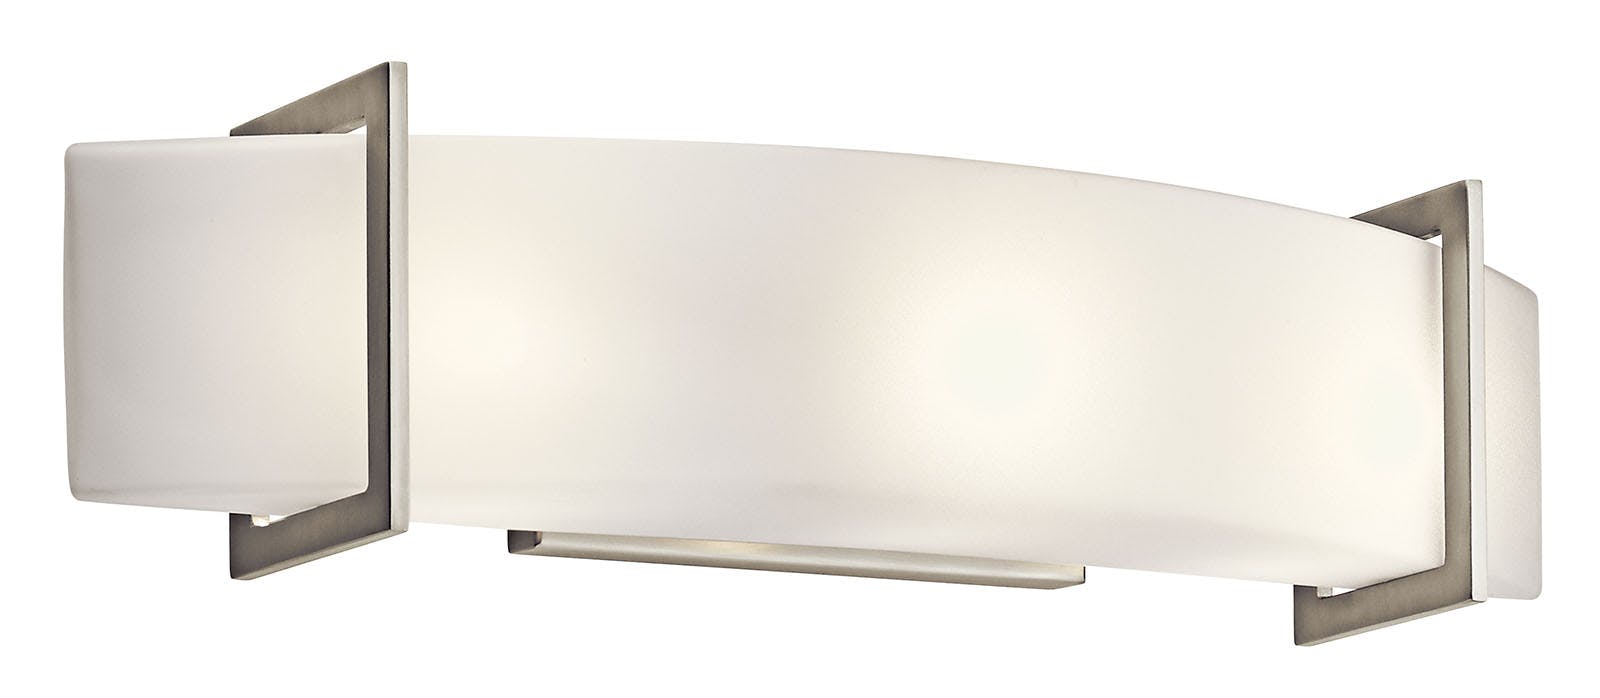 Crescent View 24" Bath Light Nickel on a white background